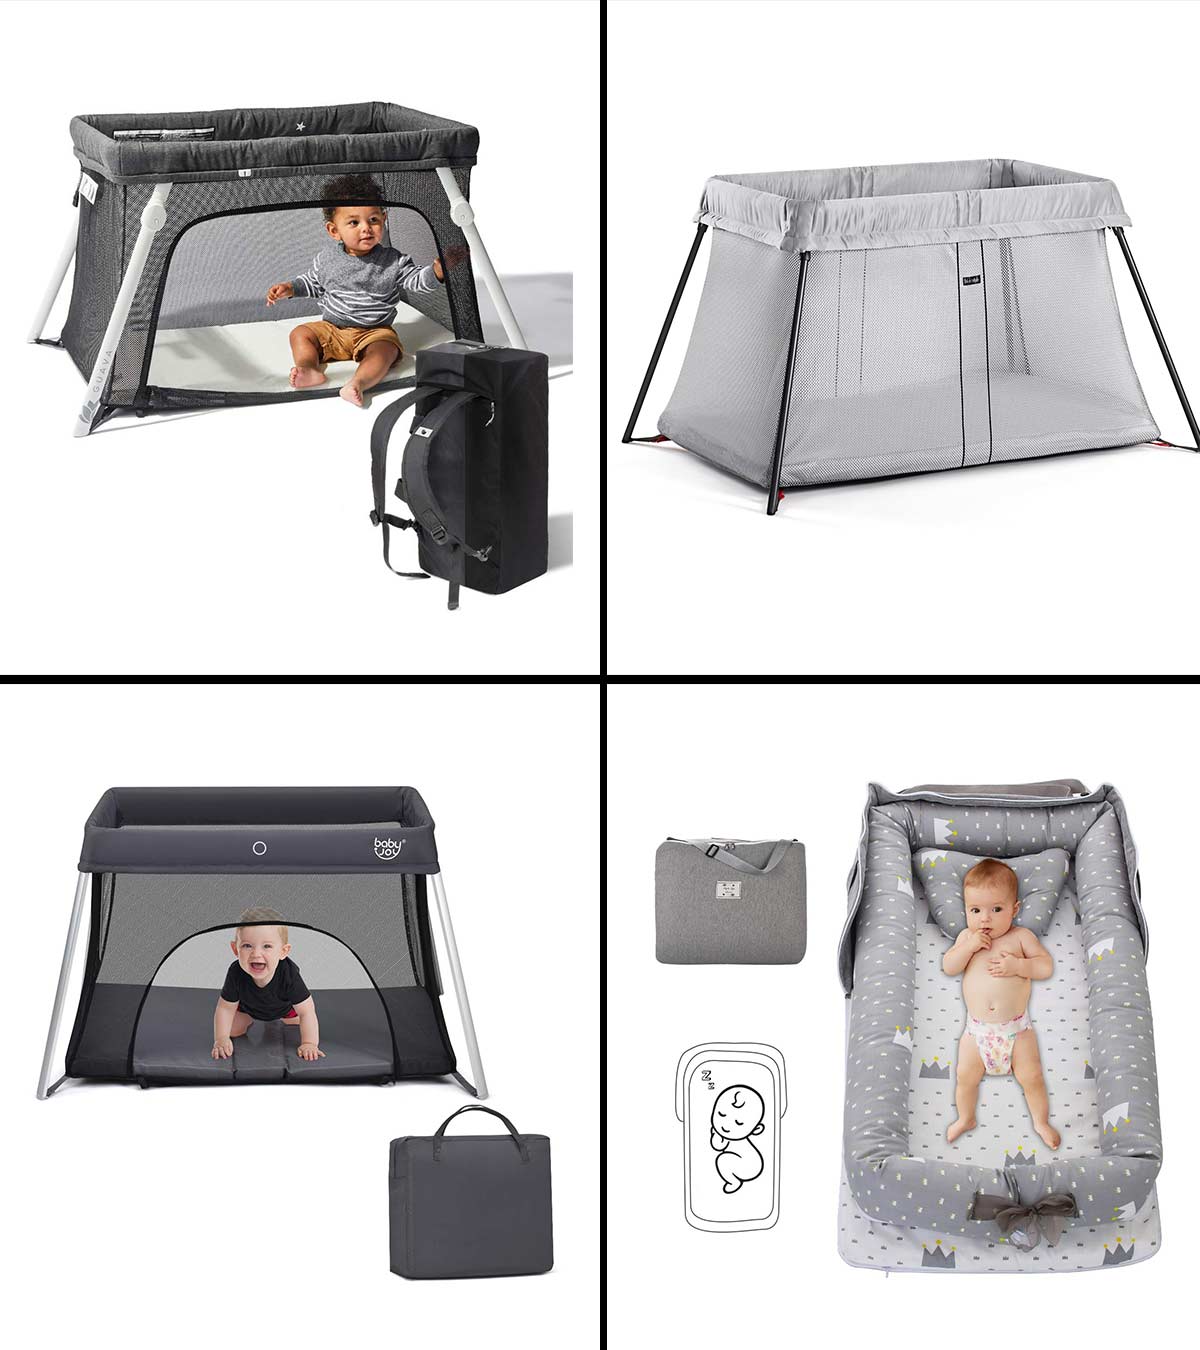 11 Best Portable Travel Cribs For Toddlers in 2023: Reviews